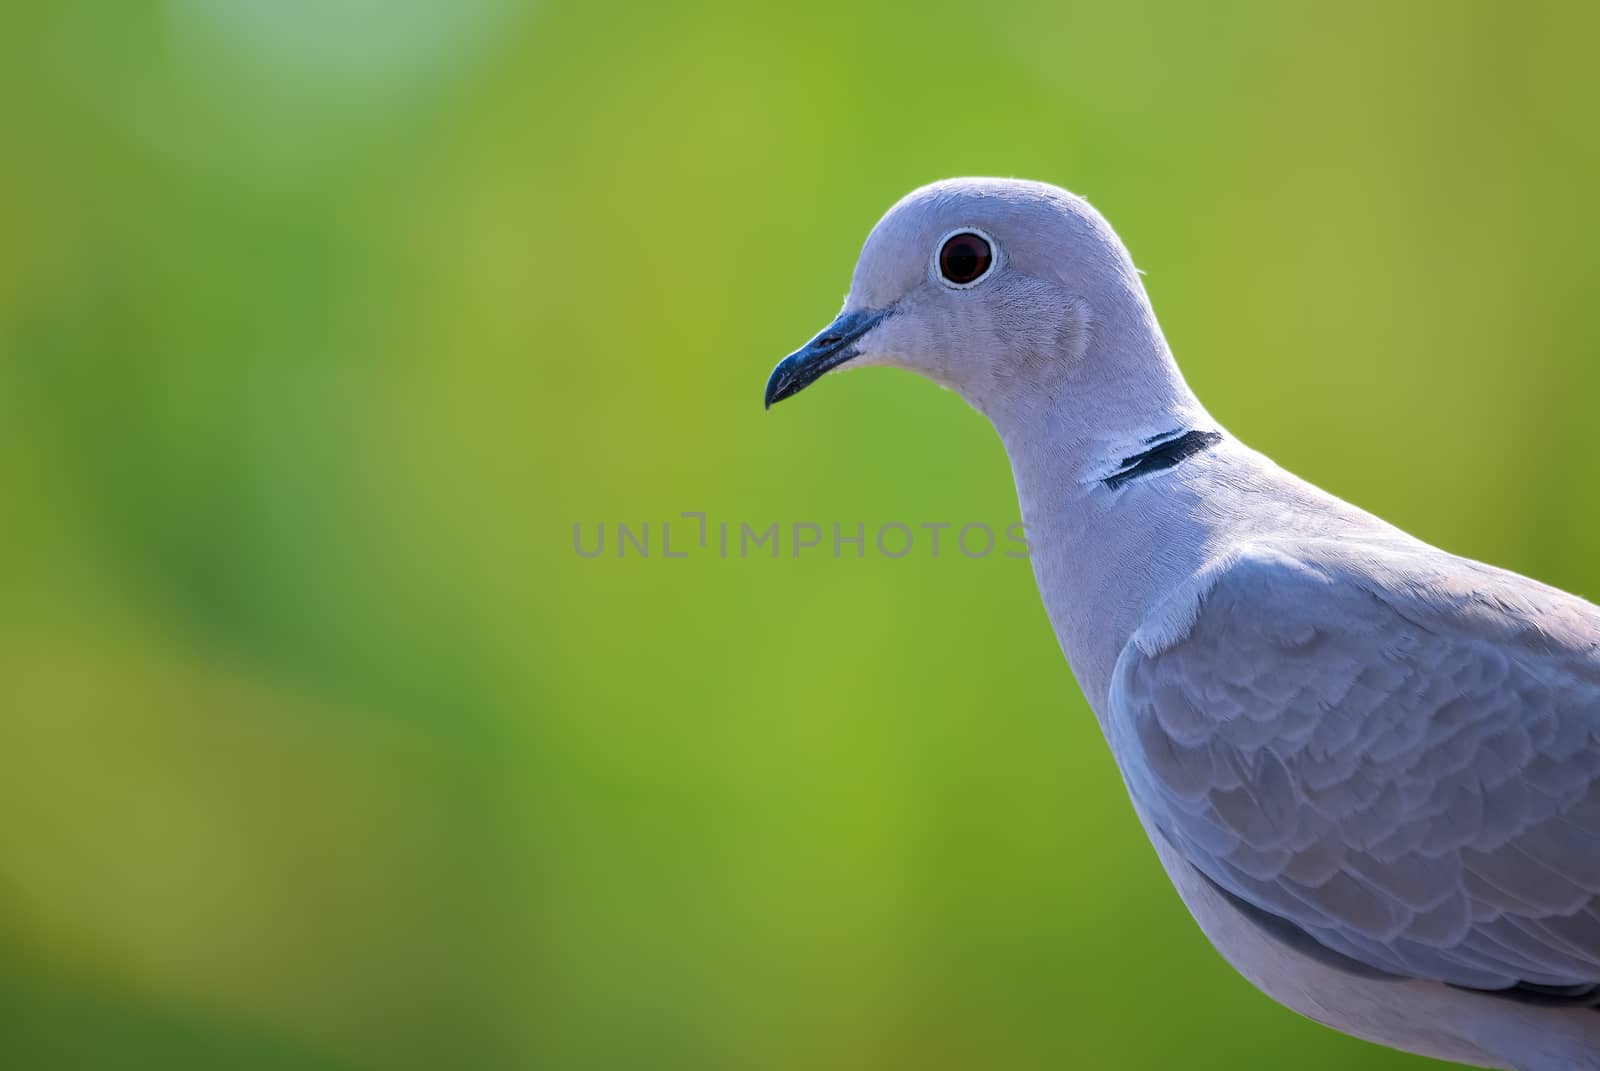 The Eurasian collared dove is a dove species native to Europe and Asia